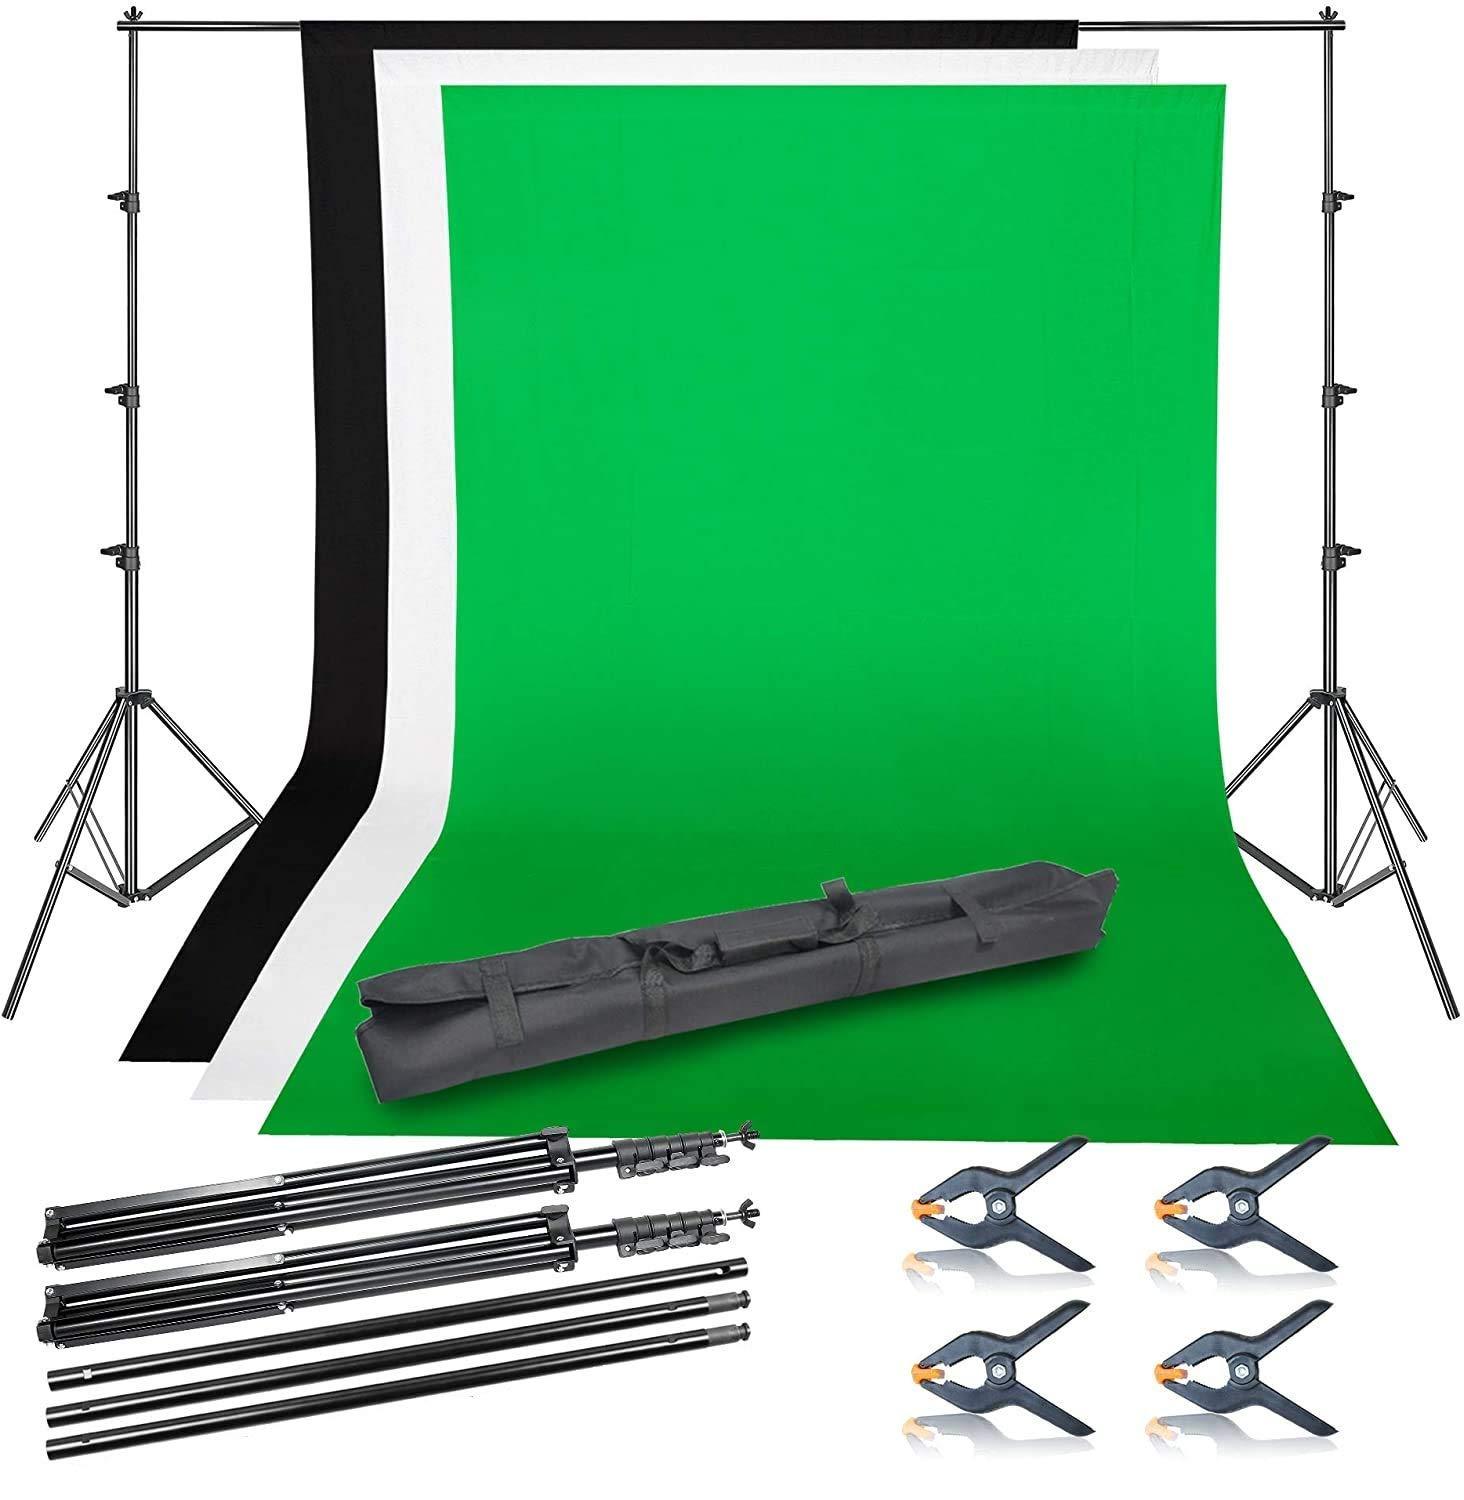 HIFFIN Photo Video Studio Background Backdrop Stand Kit, 8 x 14ft Photography Support System - The Camerashop